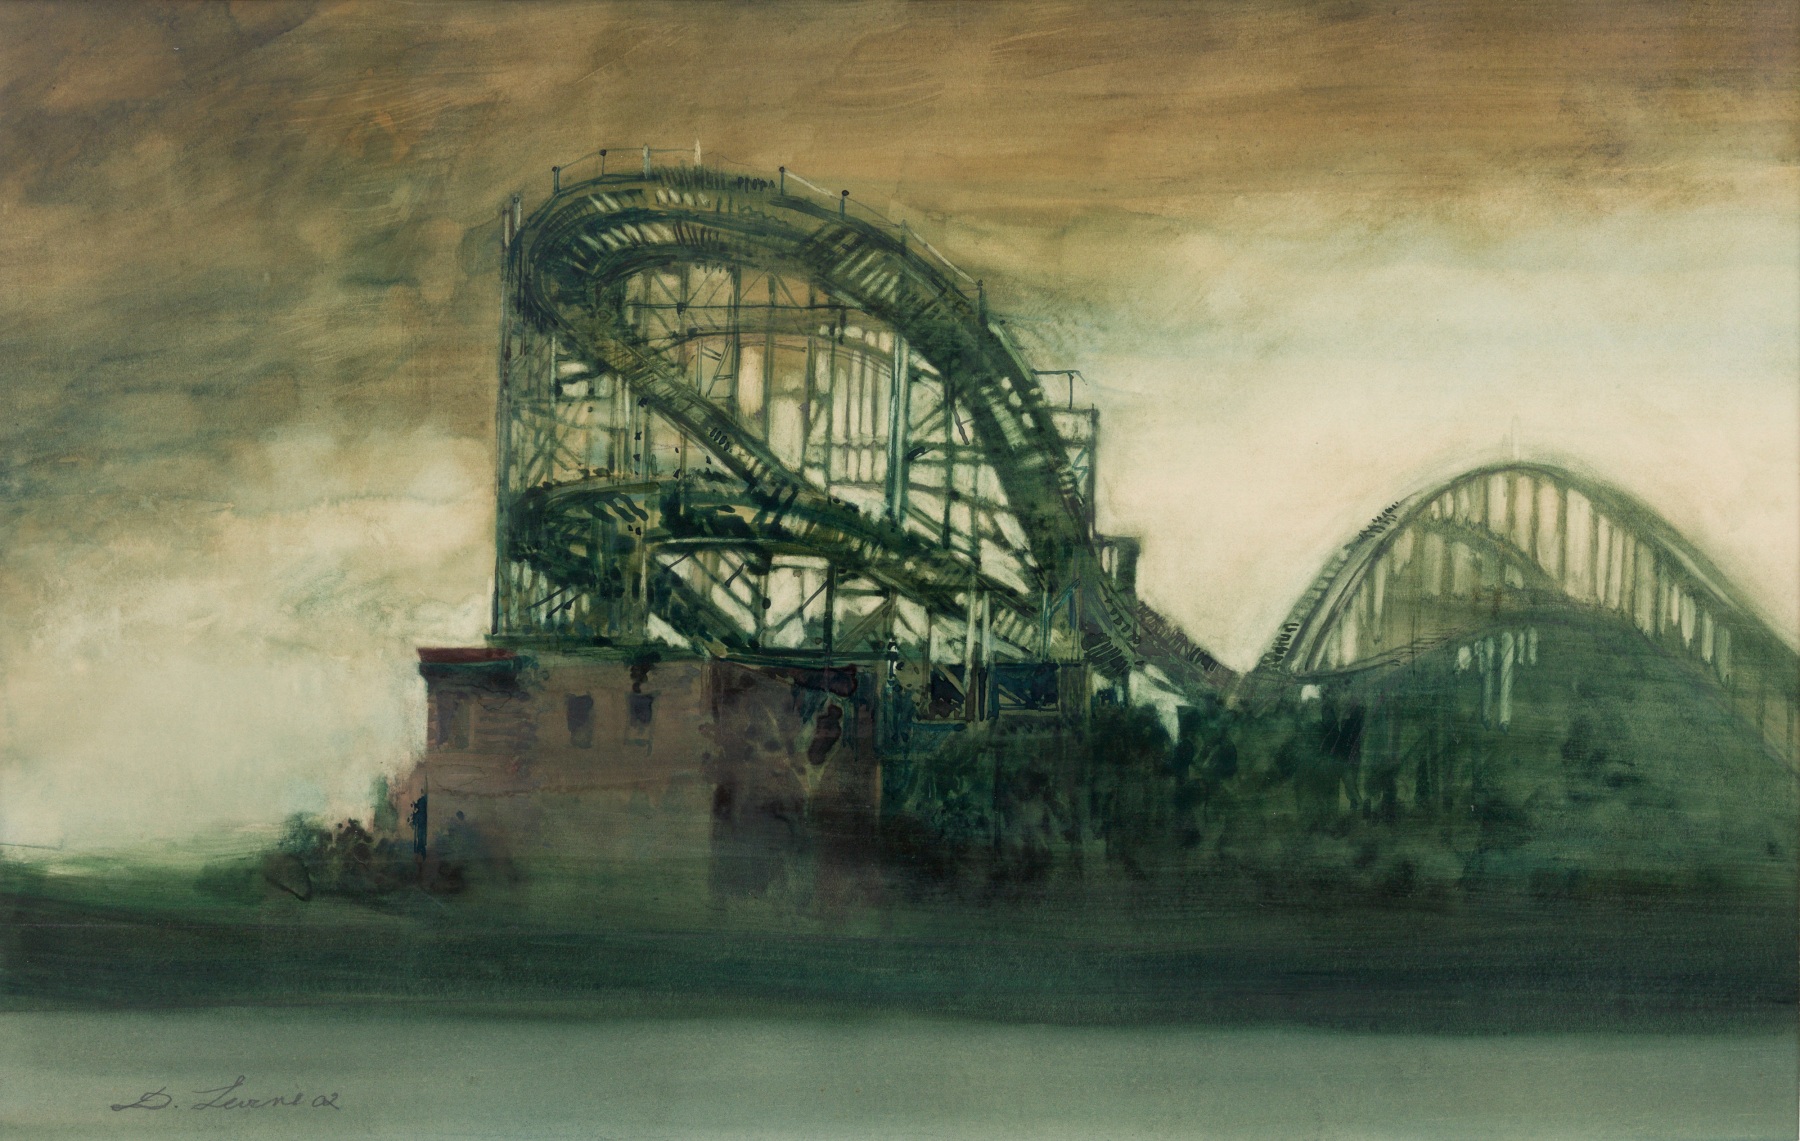 david levine, The Past (SOLD), 2003, watercolor on paper, 12 1/2 x 19 3/4 inches